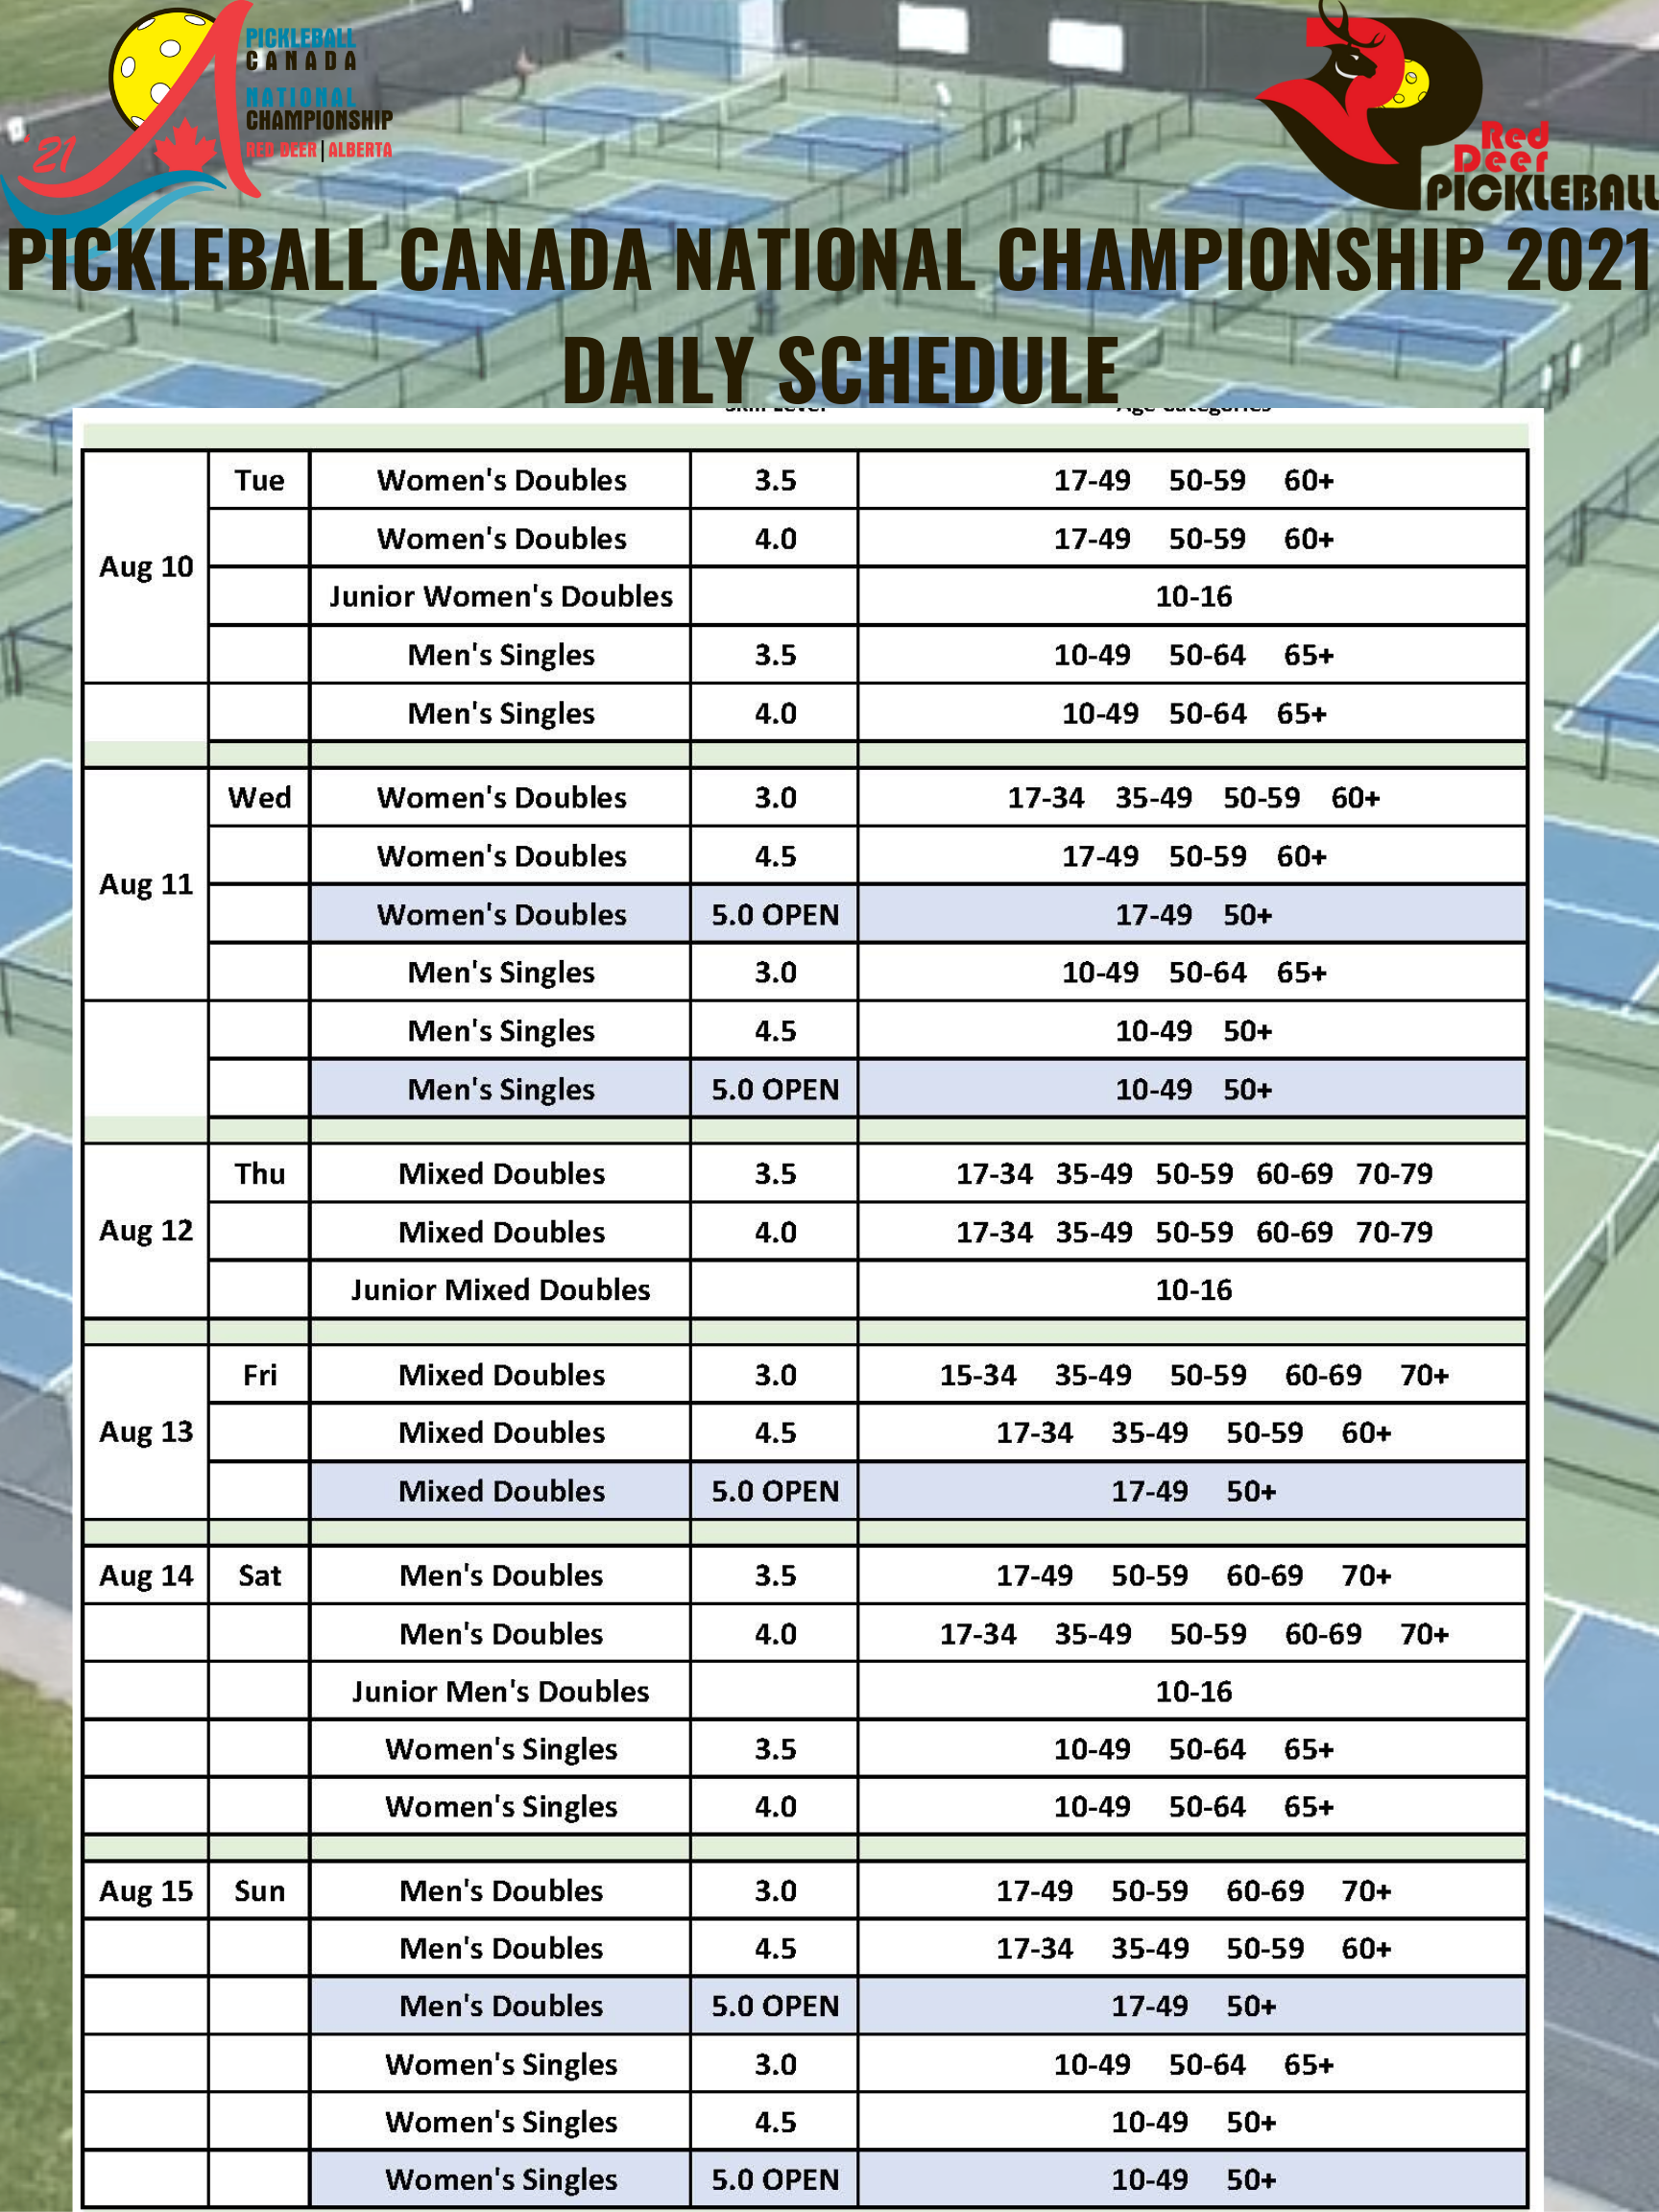 Pickleball Canada National Championship 2021 Daily Schedule